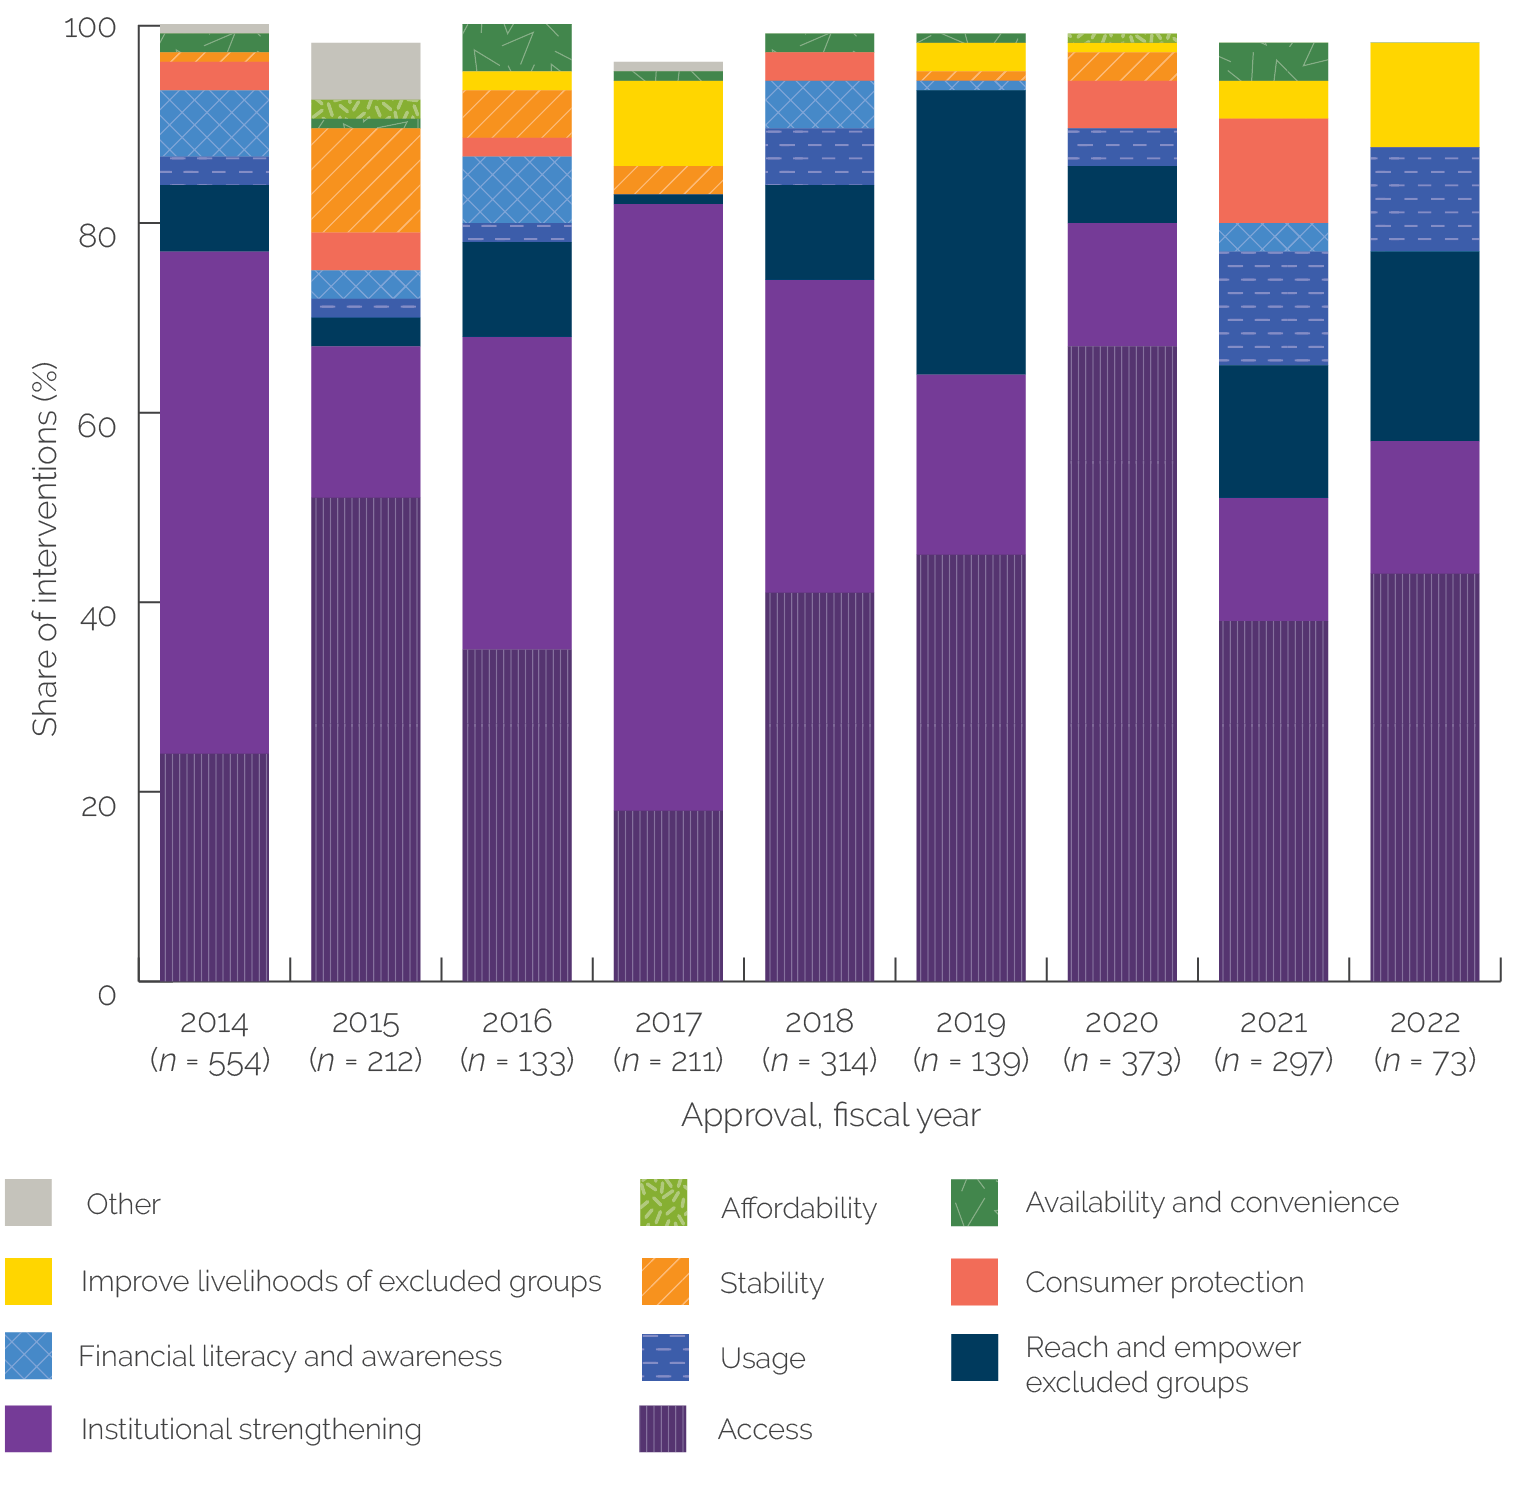 A 100% stacked column graph shows the financial inclusion portfolio’s focus areas, led by access and institutional strengthening. Categories of reach and empower excluded groups and usage increased in F Y 21 and F Y 22.